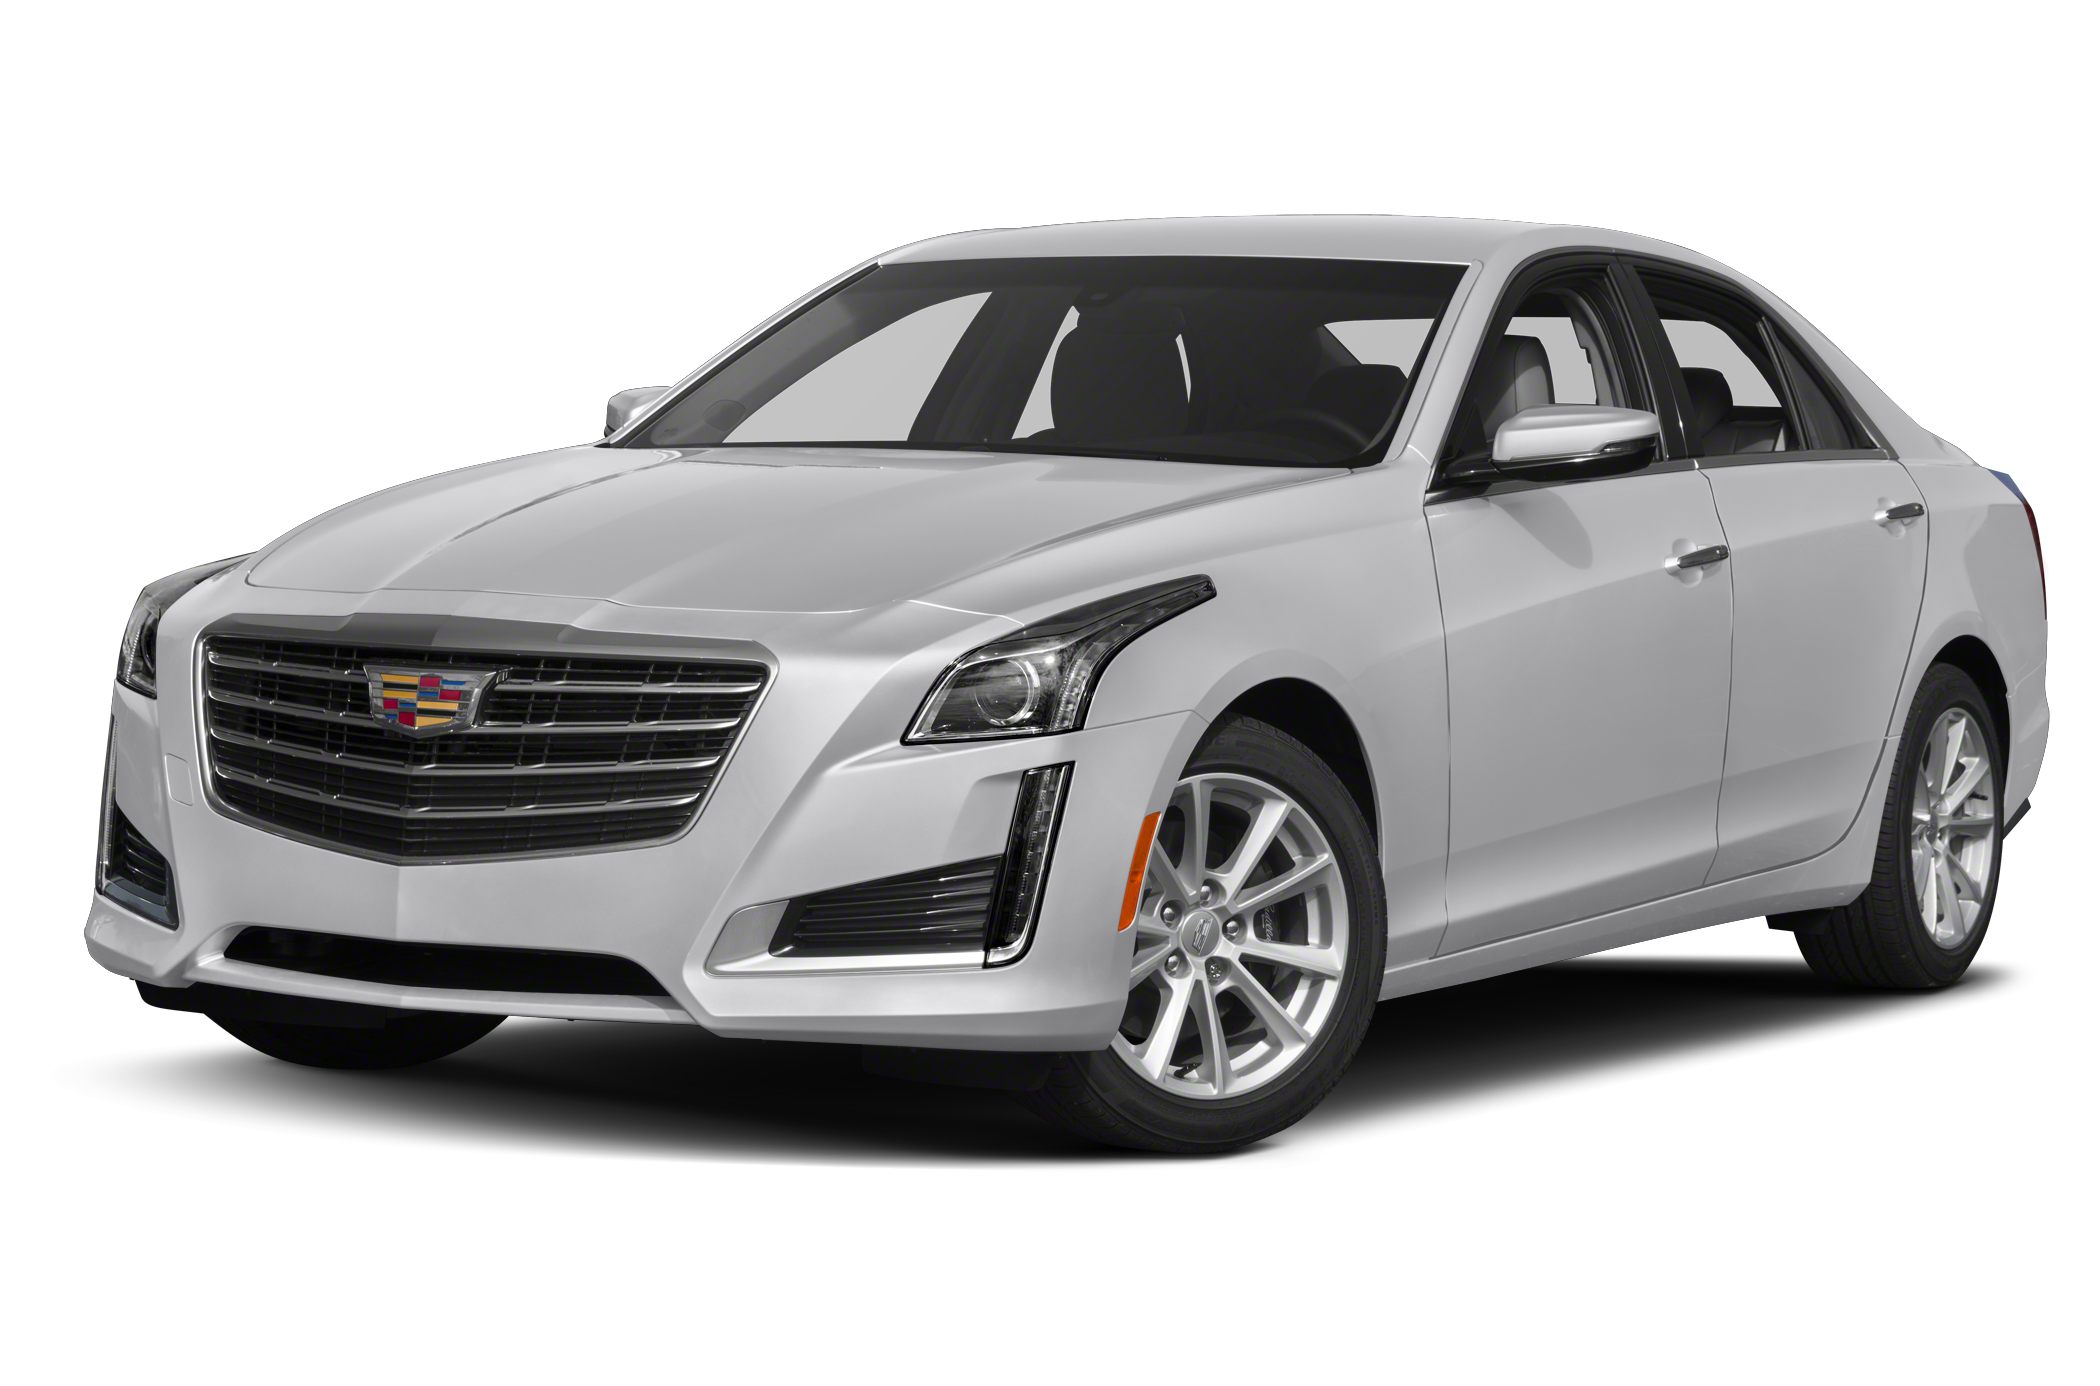 2019 Cadillac Cts 3 6l Twin Turbo V Sport 4dr Rear Wheel Drive Sedan Pictures